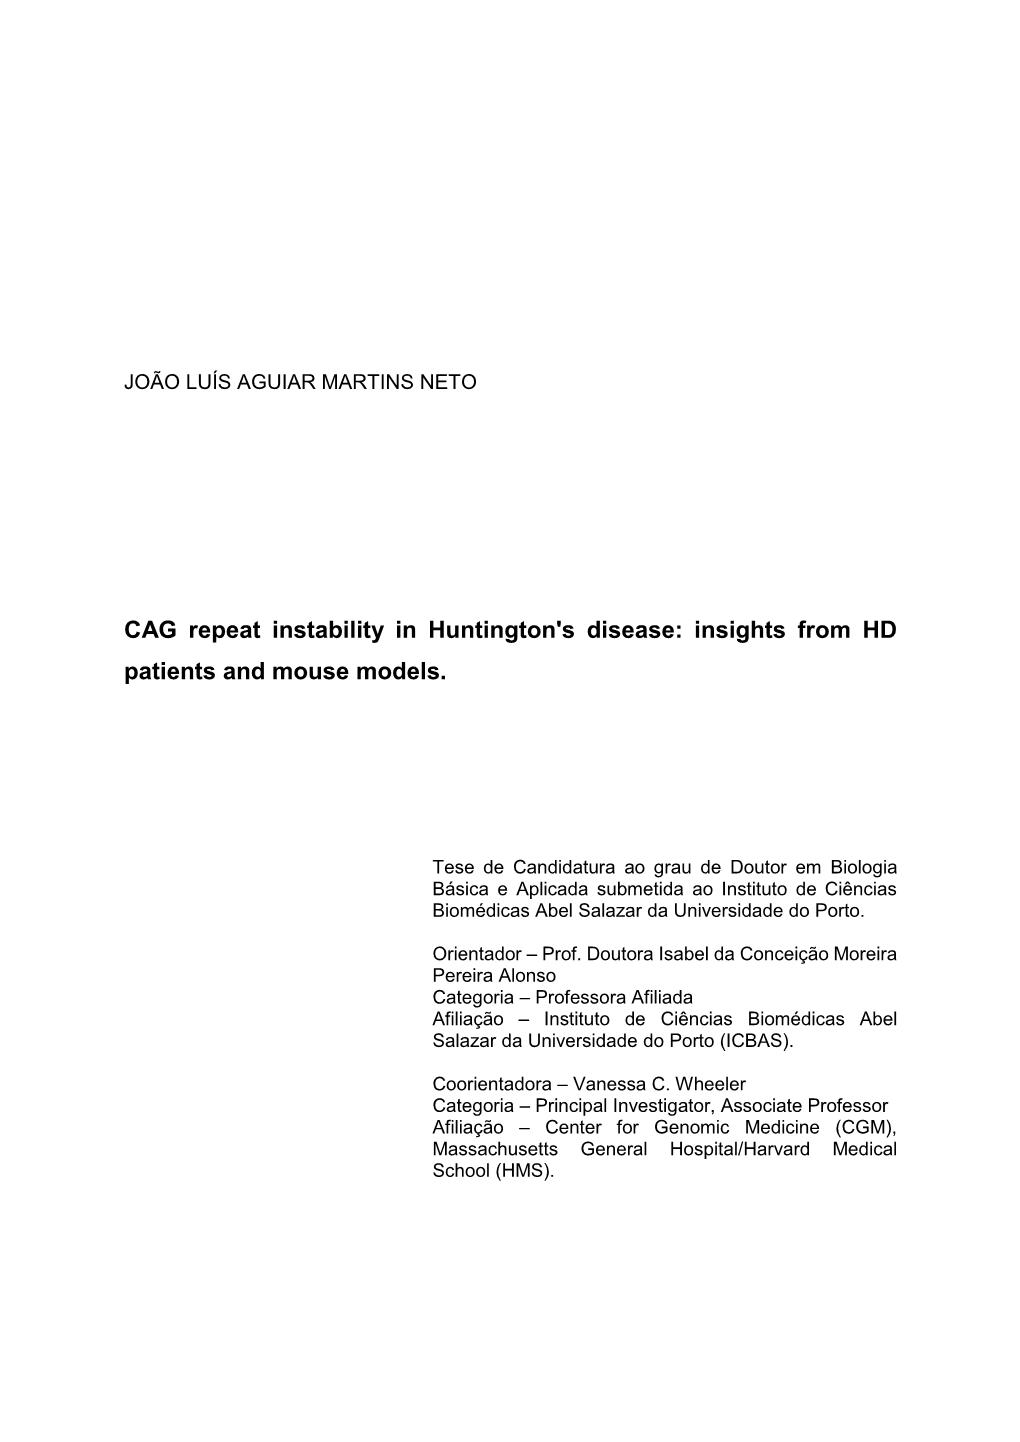 CAG Repeat Instability in Huntington's Disease: Insights from HD Patients and Mouse Models